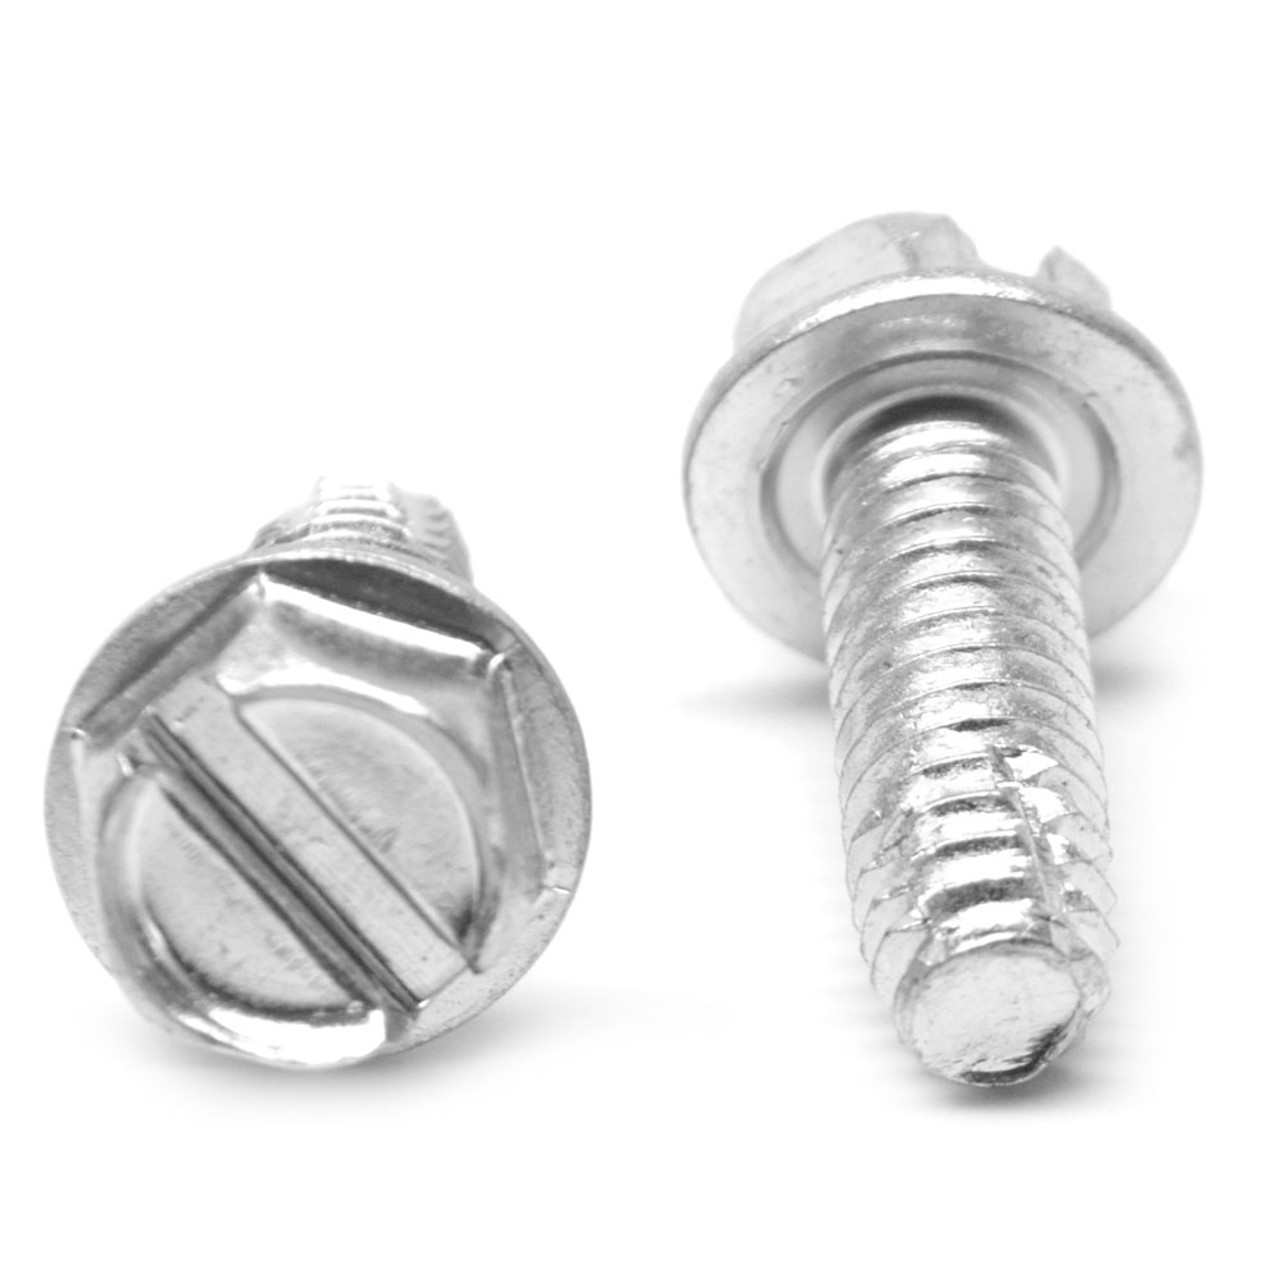 #6-32 x 1/2" (FT) Coarse Thread Thread Cutting Screw Slotted Hex Washer Head Type F Low Carbon Steel Zinc Plated